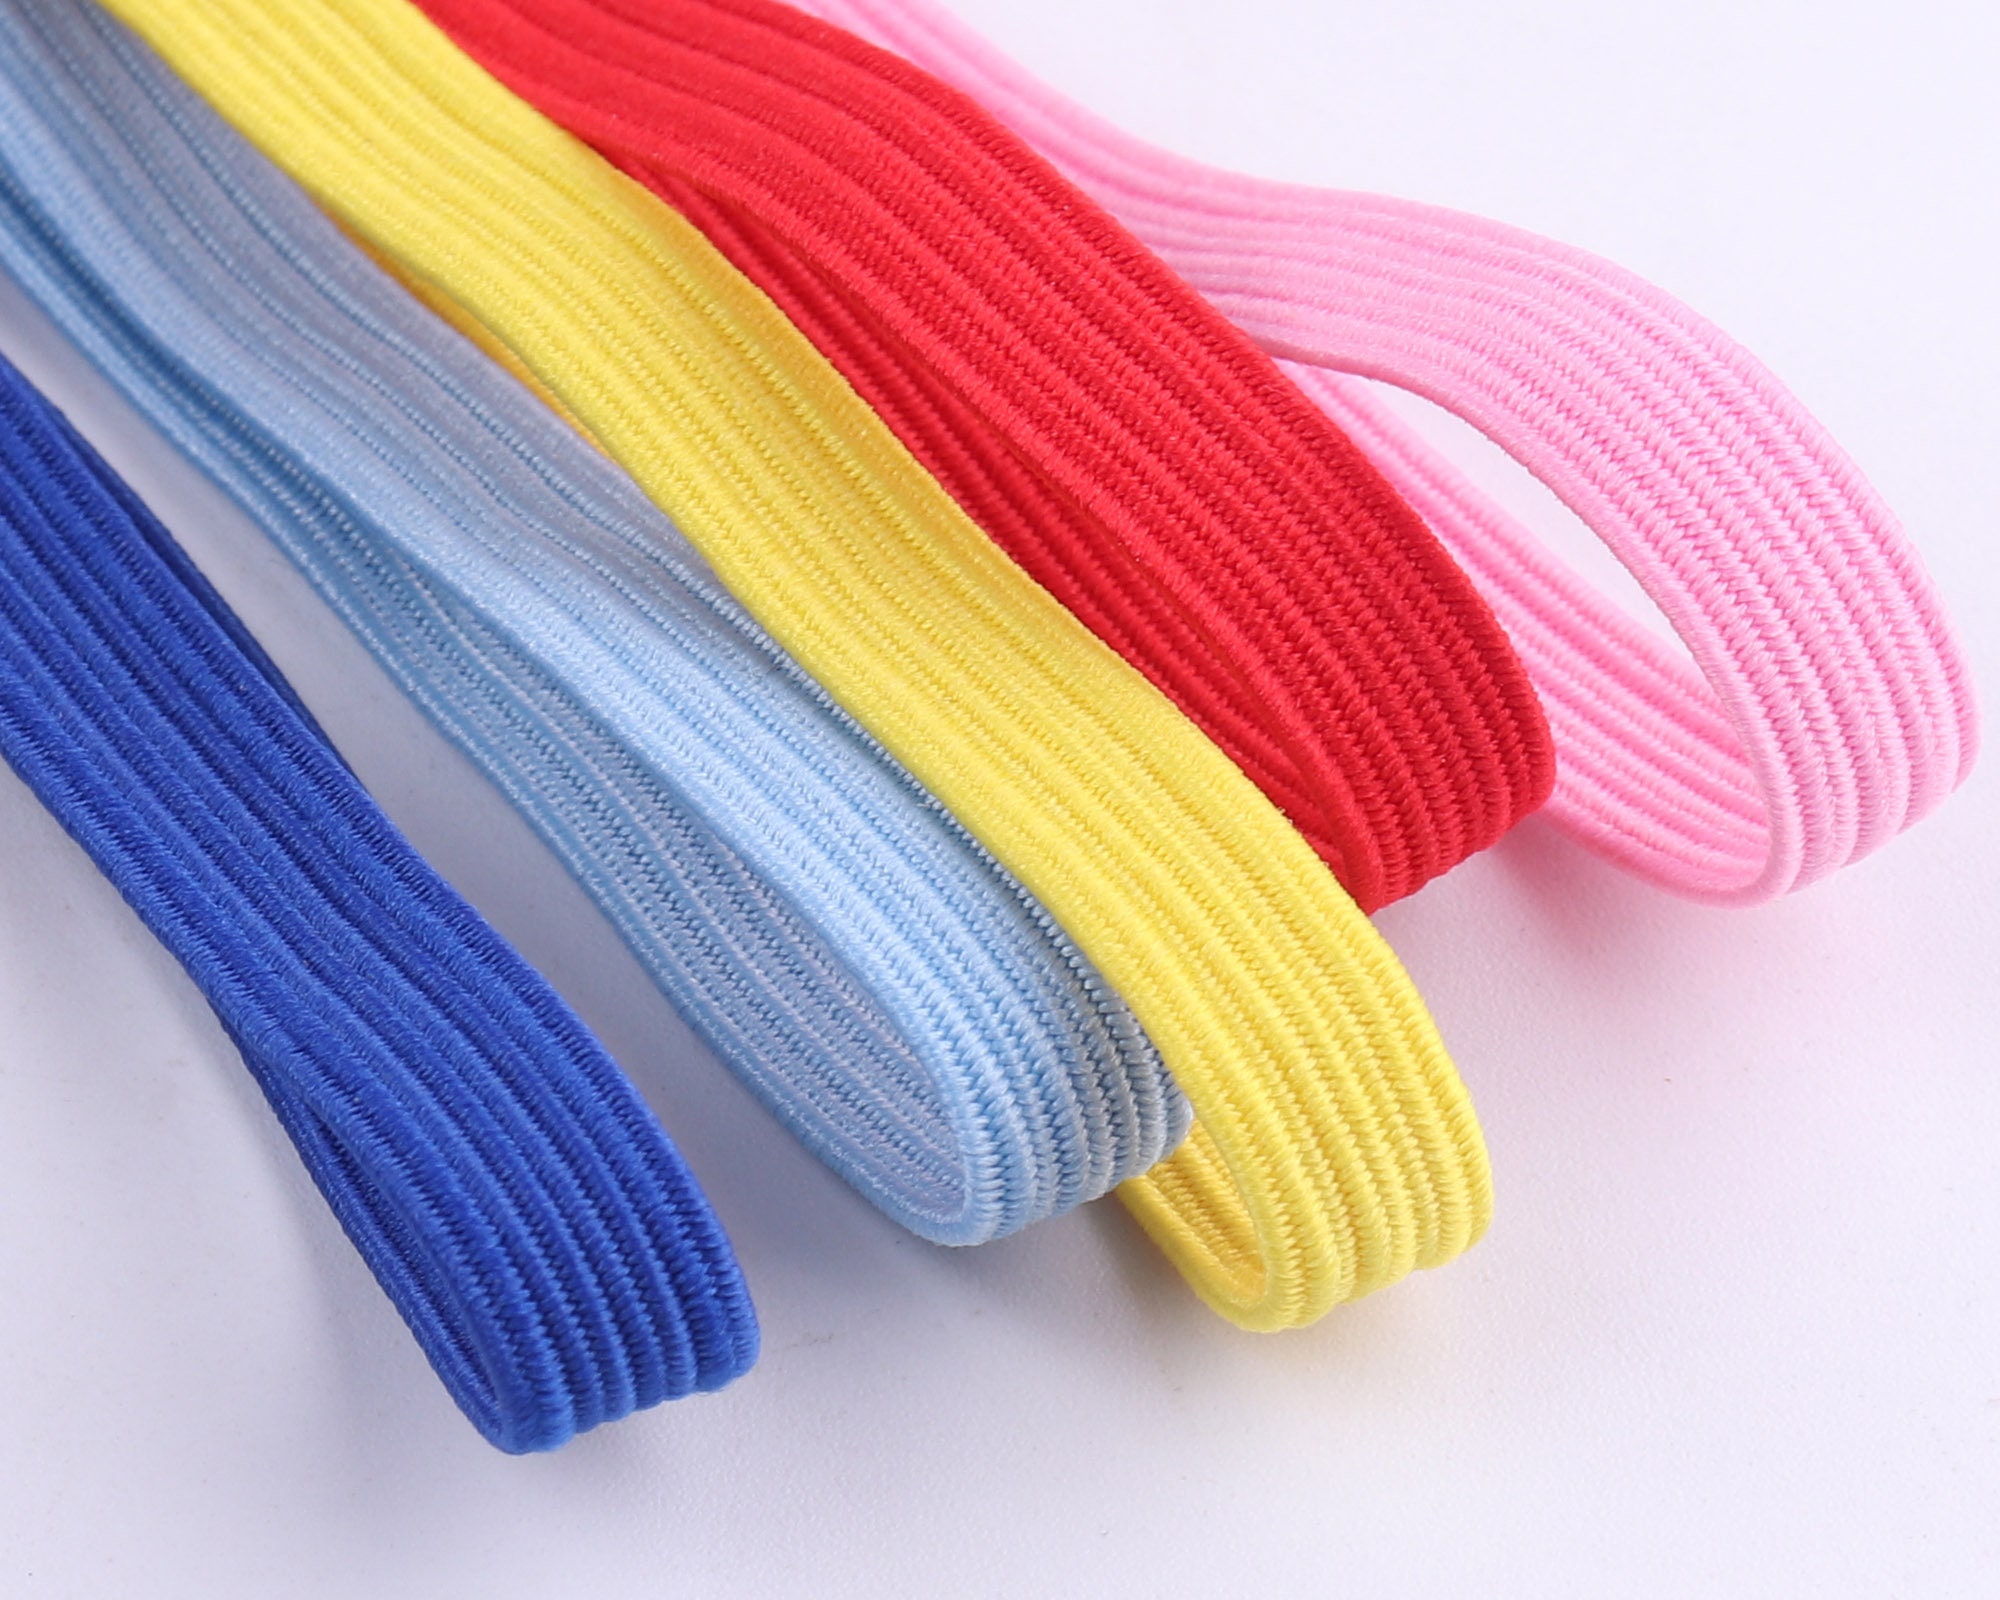 6mm1/4 Flat Elastic Cord for Face Mask Stretch Cord - Etsy